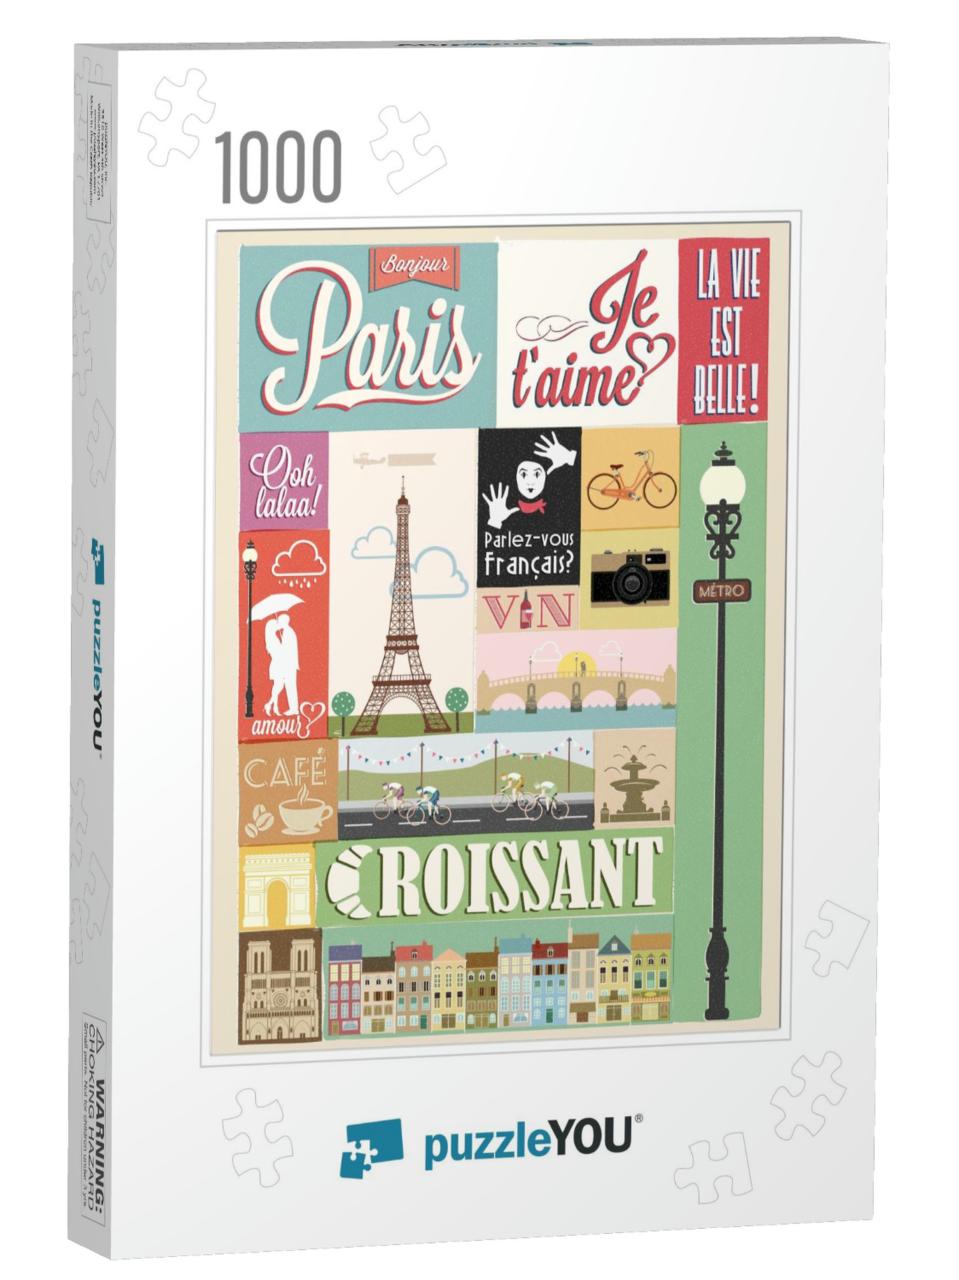 Typographical Retro Style Poster with Paris Symbols & Lan... Jigsaw Puzzle with 1000 pieces